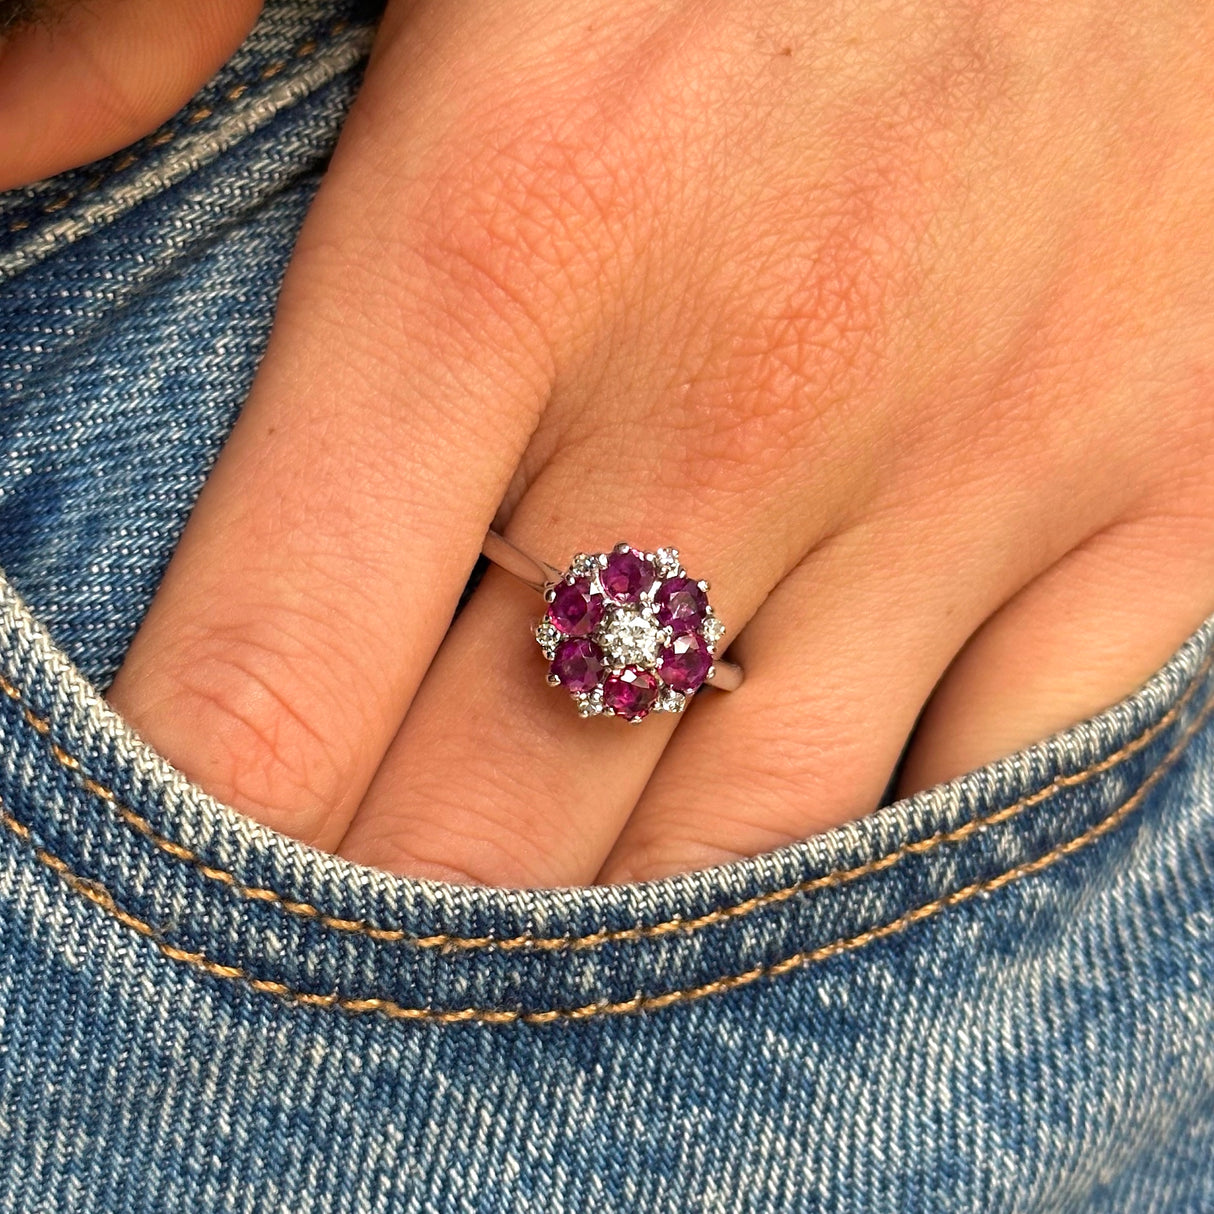 ruby and diamond cluster ring worn hand in placed in pocket of jeans front view. 